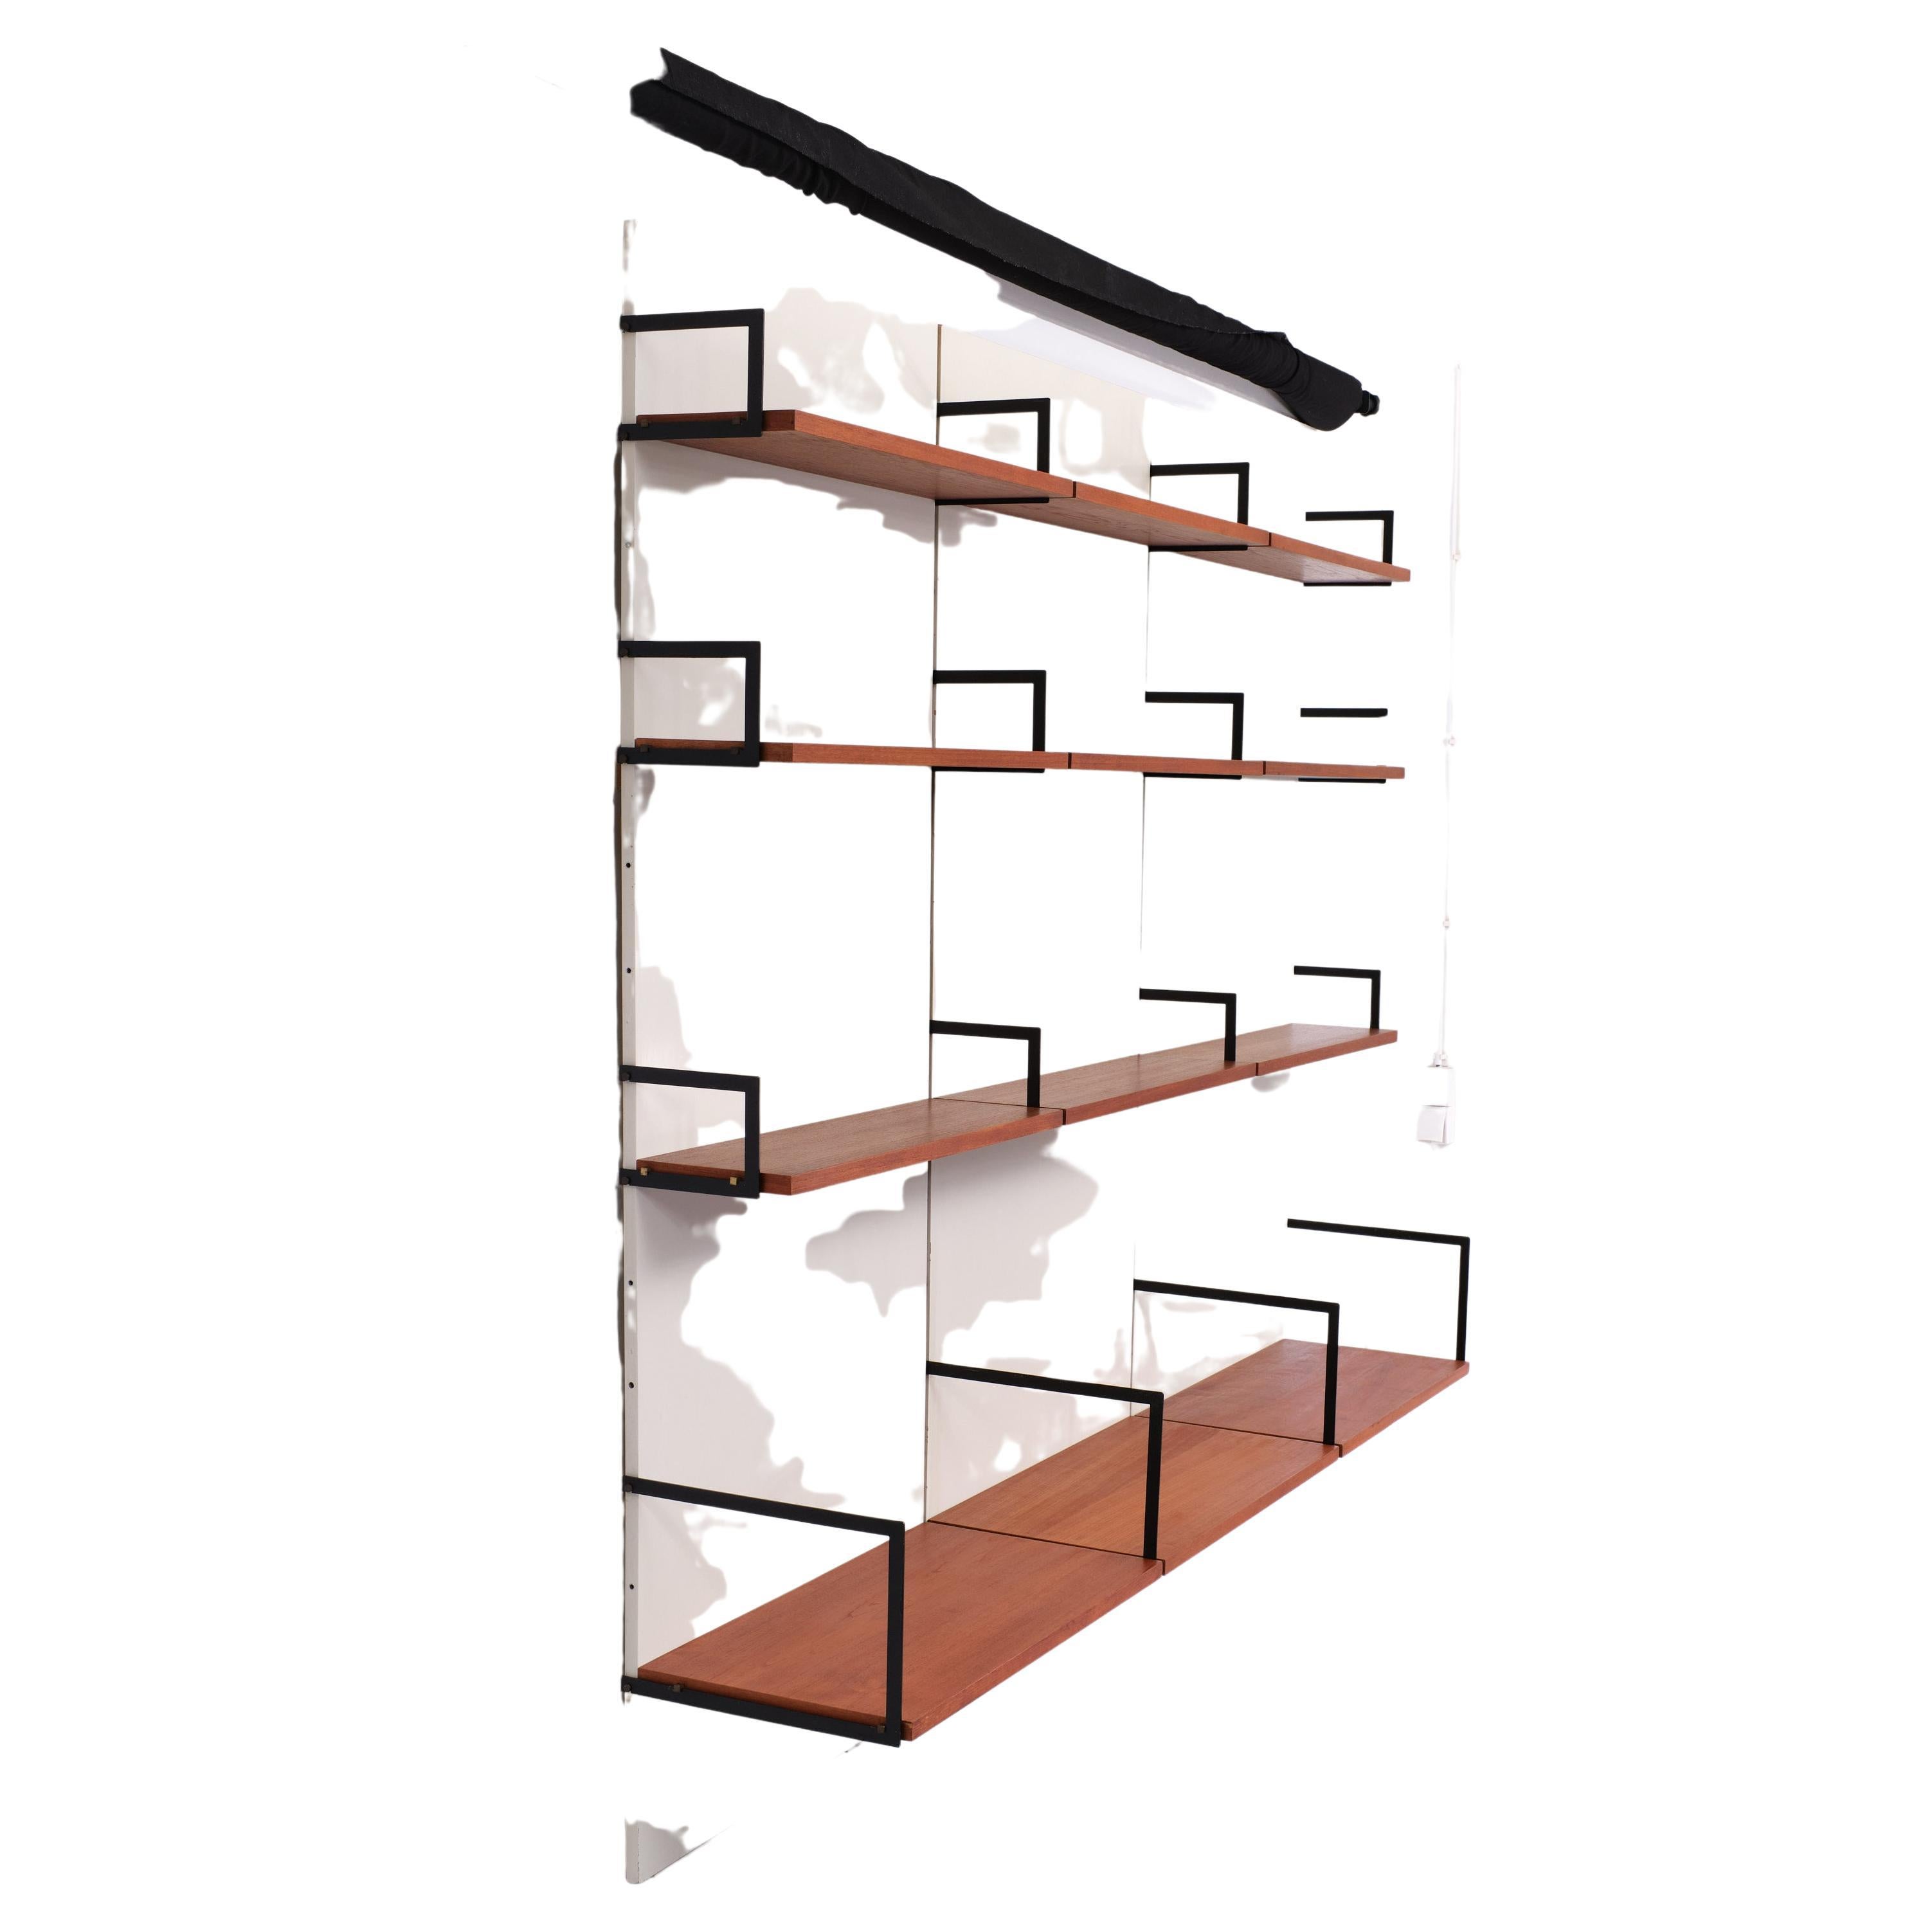 Stunning wall system. Three hanging wall panels in a off white color comes with the original hanging rails. Thirteen teak selves, the three lowest shelves are wider, all the shelves are in a perfect condition. black square shaped brackets and comes